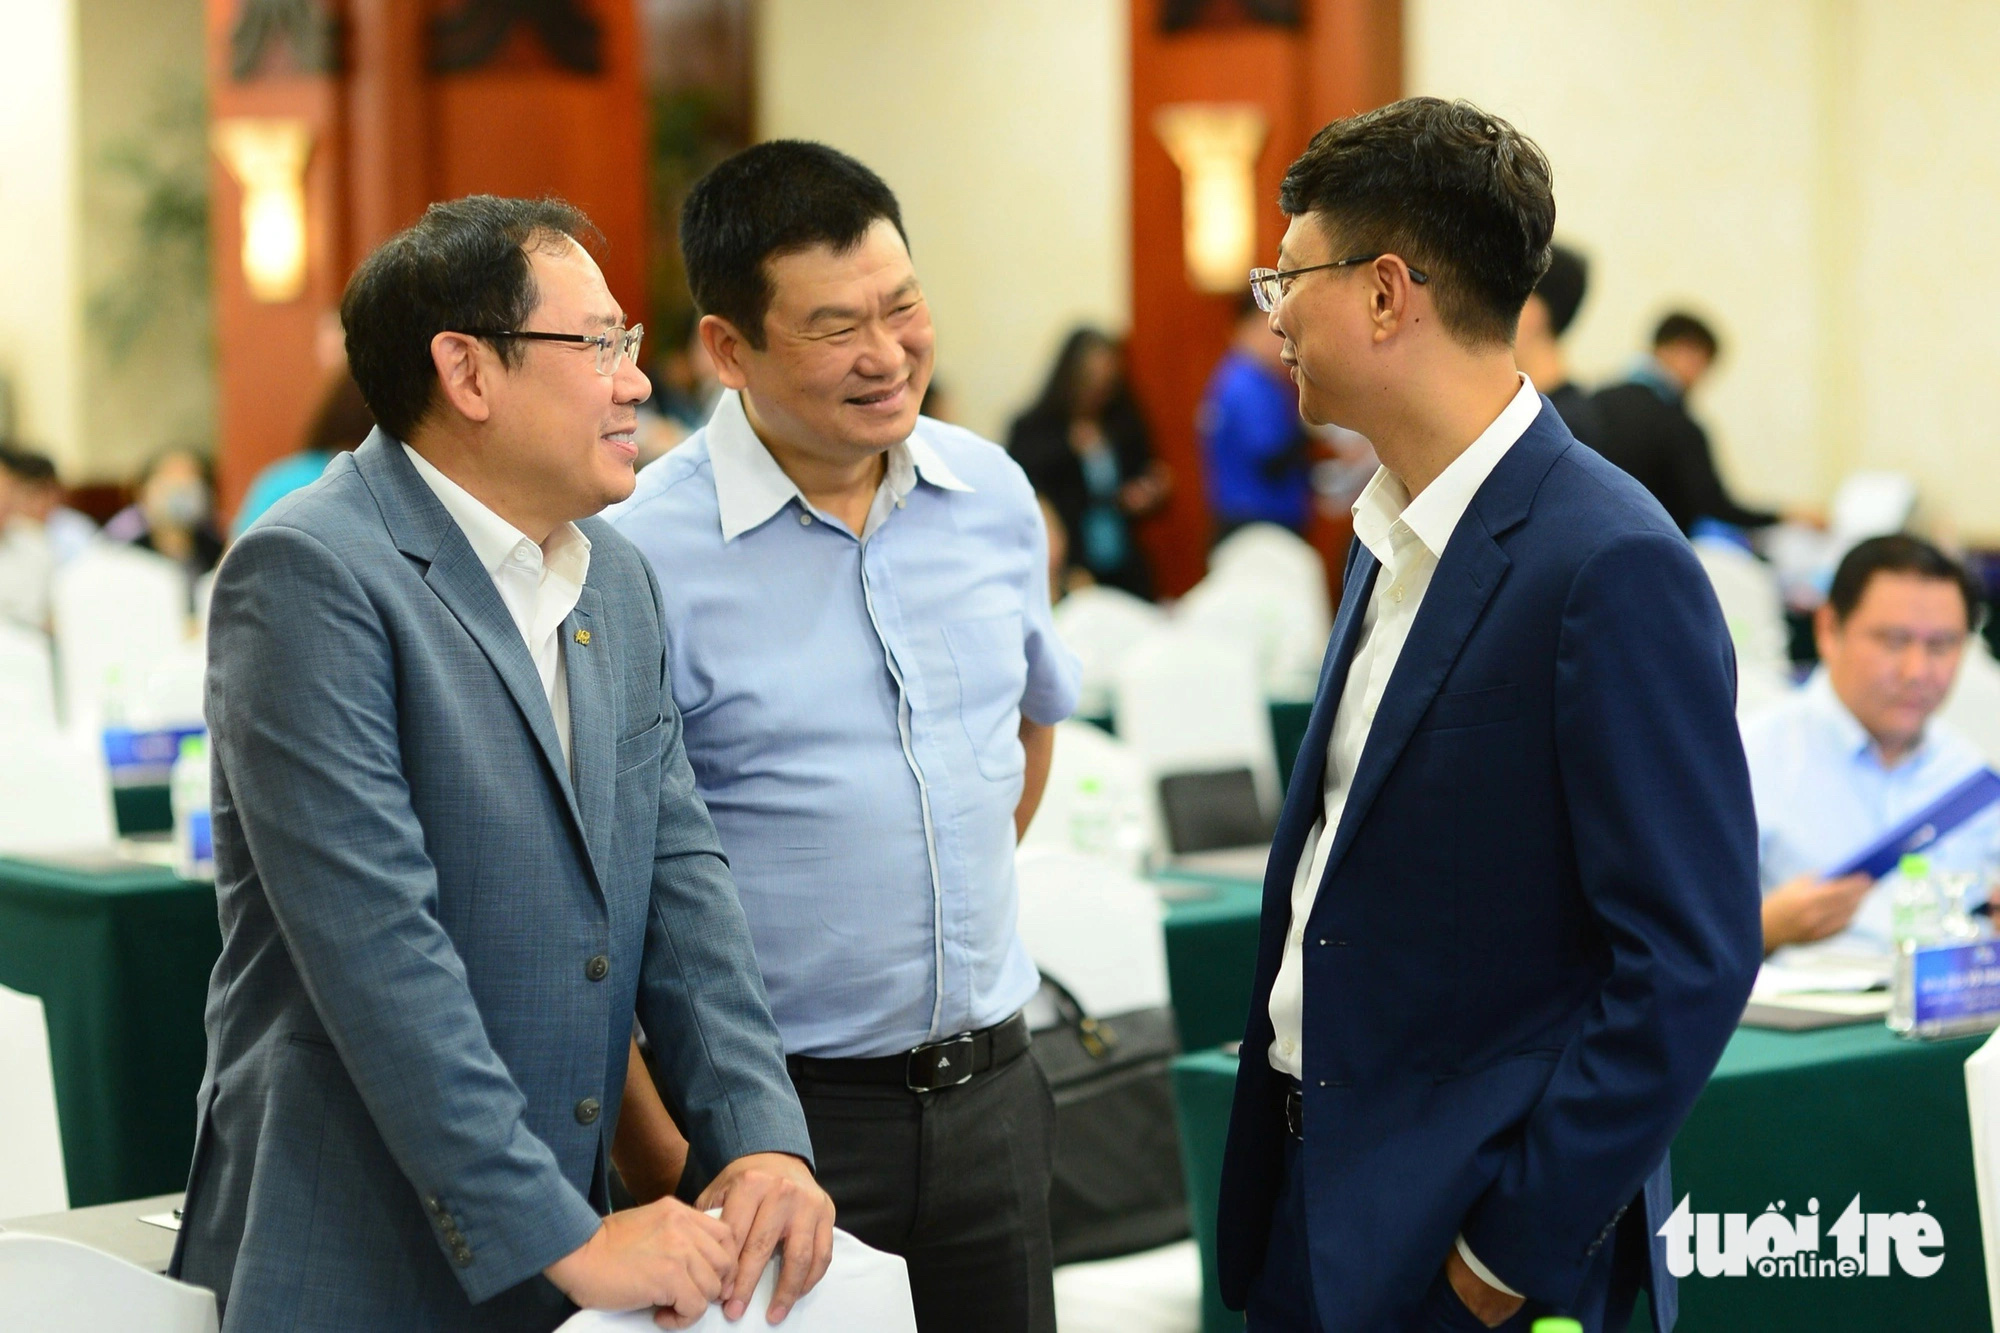 From left: Tu Tien Phat, general director of ACB, Pham Truong Giang, from the Payment Department at the State Bank of Vietnam, and Le Anh Dung, deputy director of the Payment Department of the State Bank of Vietnam, chat before the press conference for the 2024 Cashless Day (June 16) in Ho Chi Minh City, May 28, 2024. Photo: Quang Dinh / Tuoi Tre